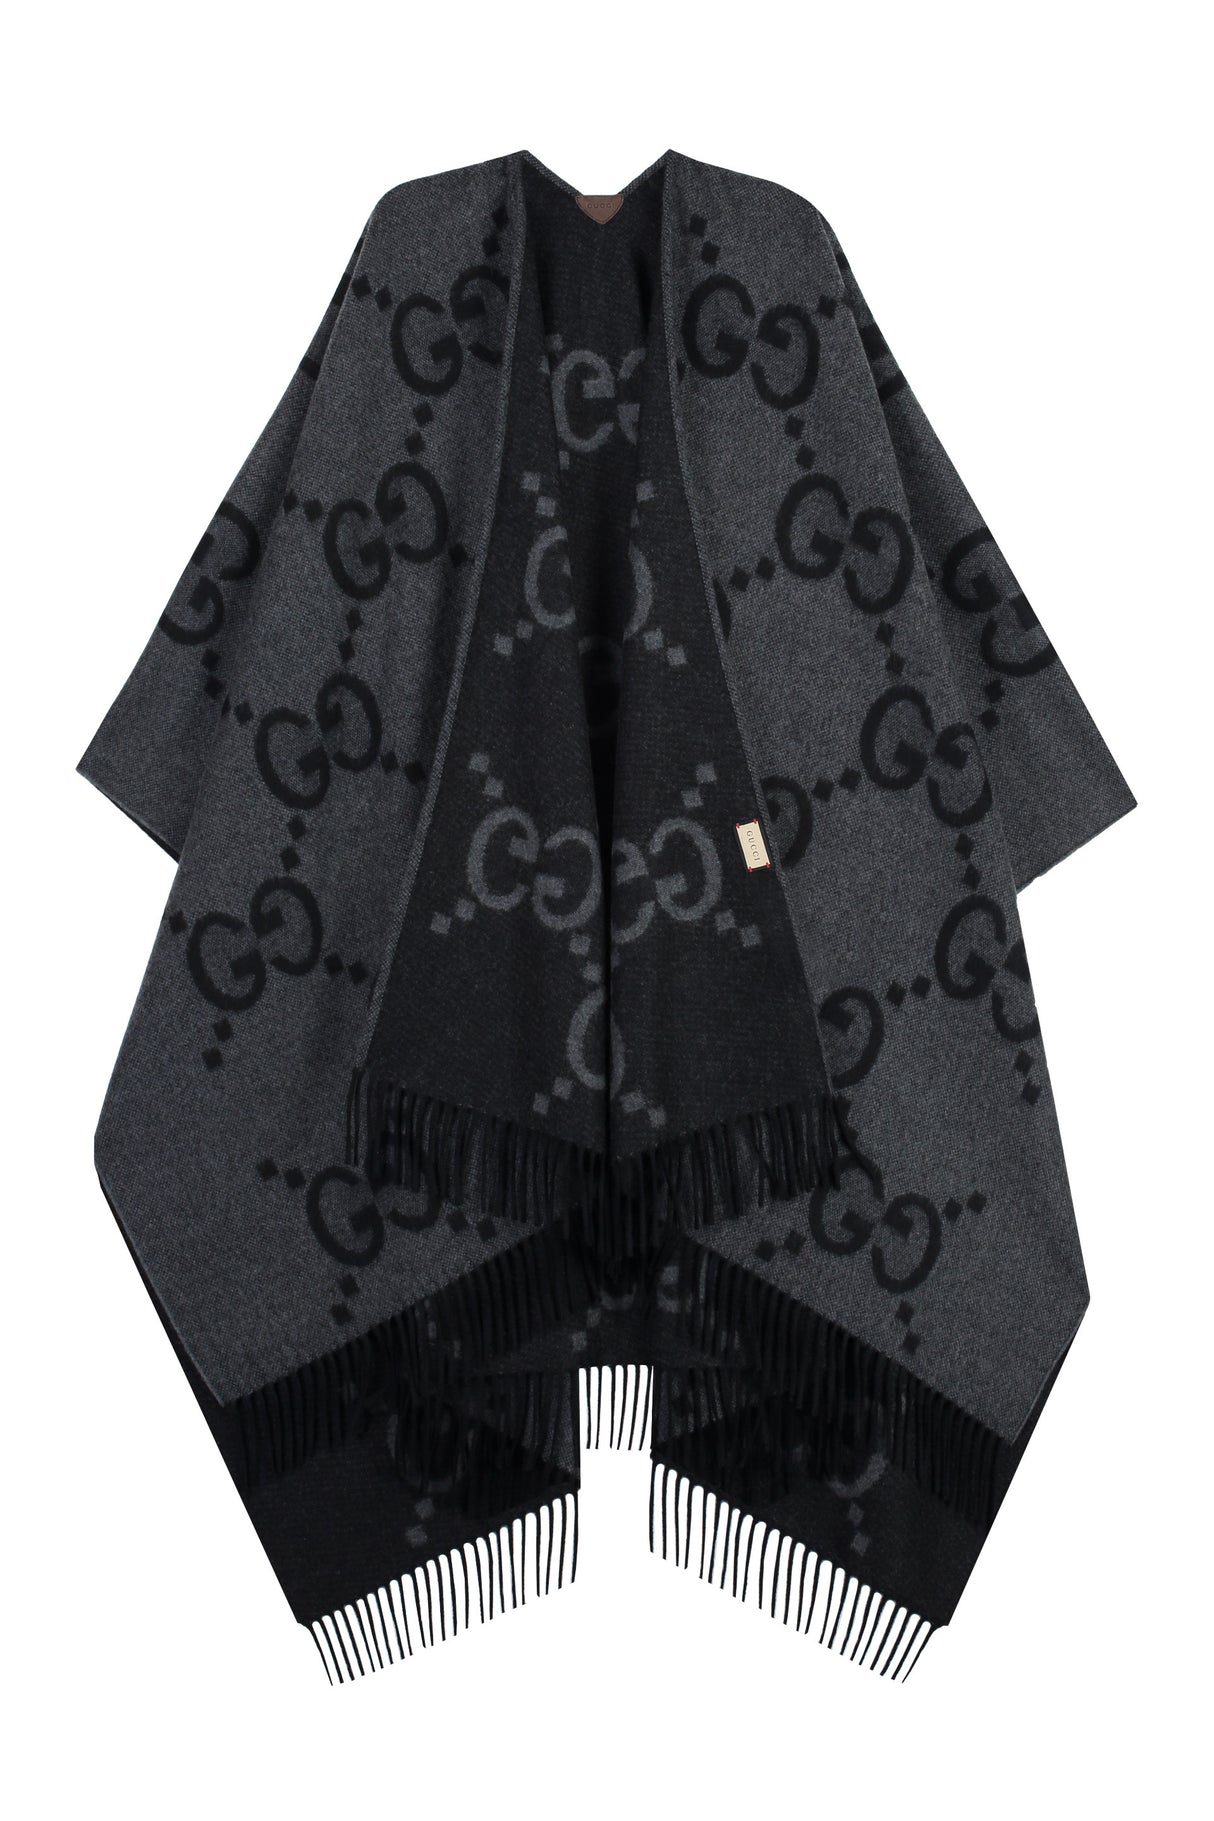 GUCCI Reversible Cashmere Poncho with Leather Details and Fringed Hemline